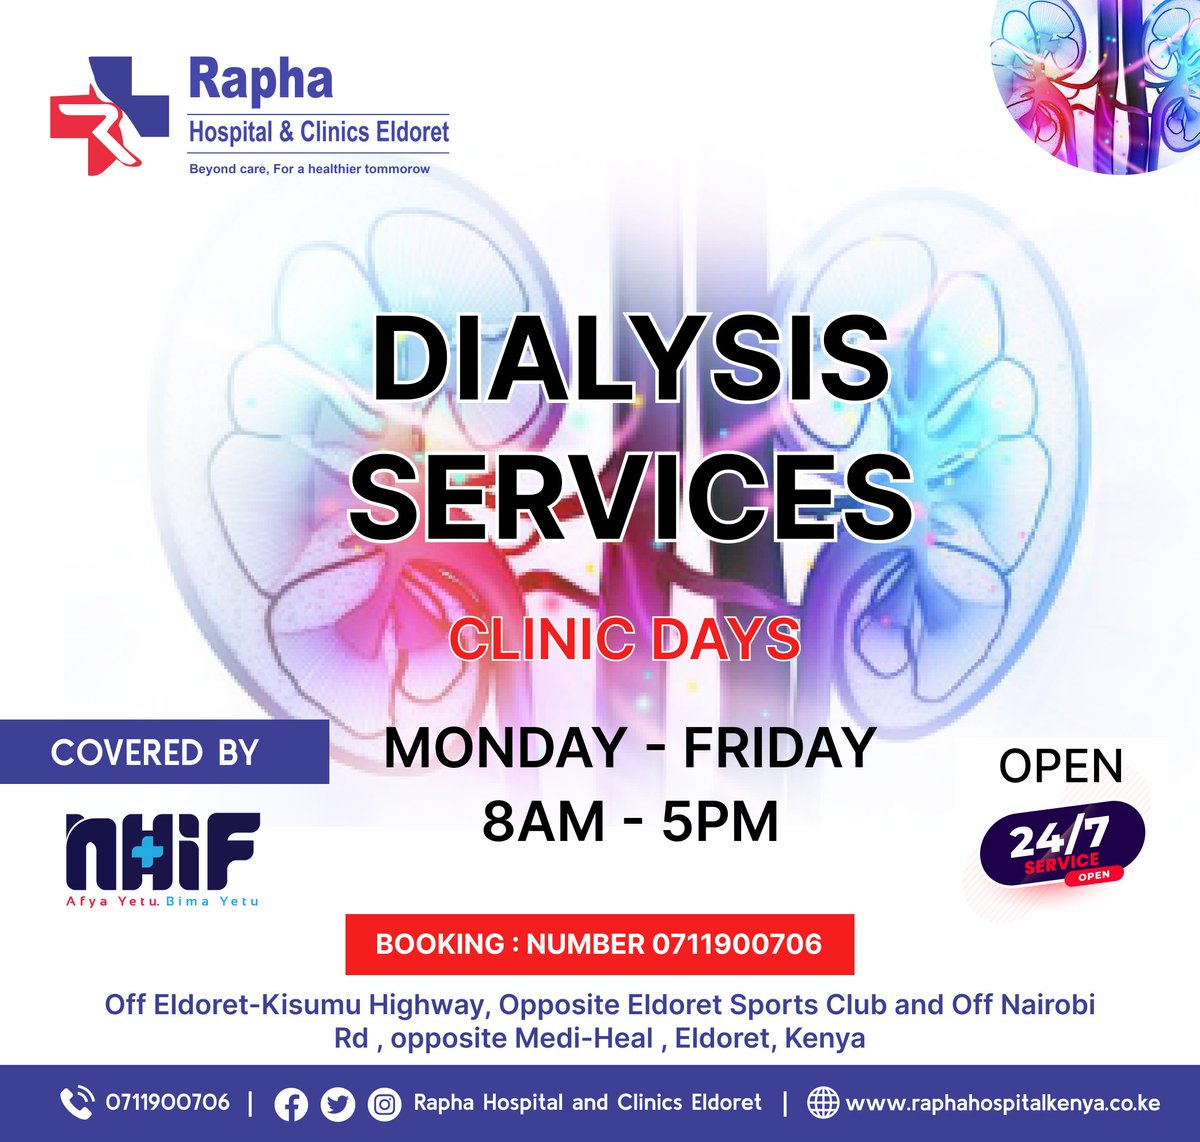 Are you looking for a reliable and affordable dialysis service in Eldoret?

Look no further than @RaphaEldoret, where we care for your health and well-being. 

#RaphaHospitalsAndClinics #DialysisServices #HealthcareRevolution #RaphaCares